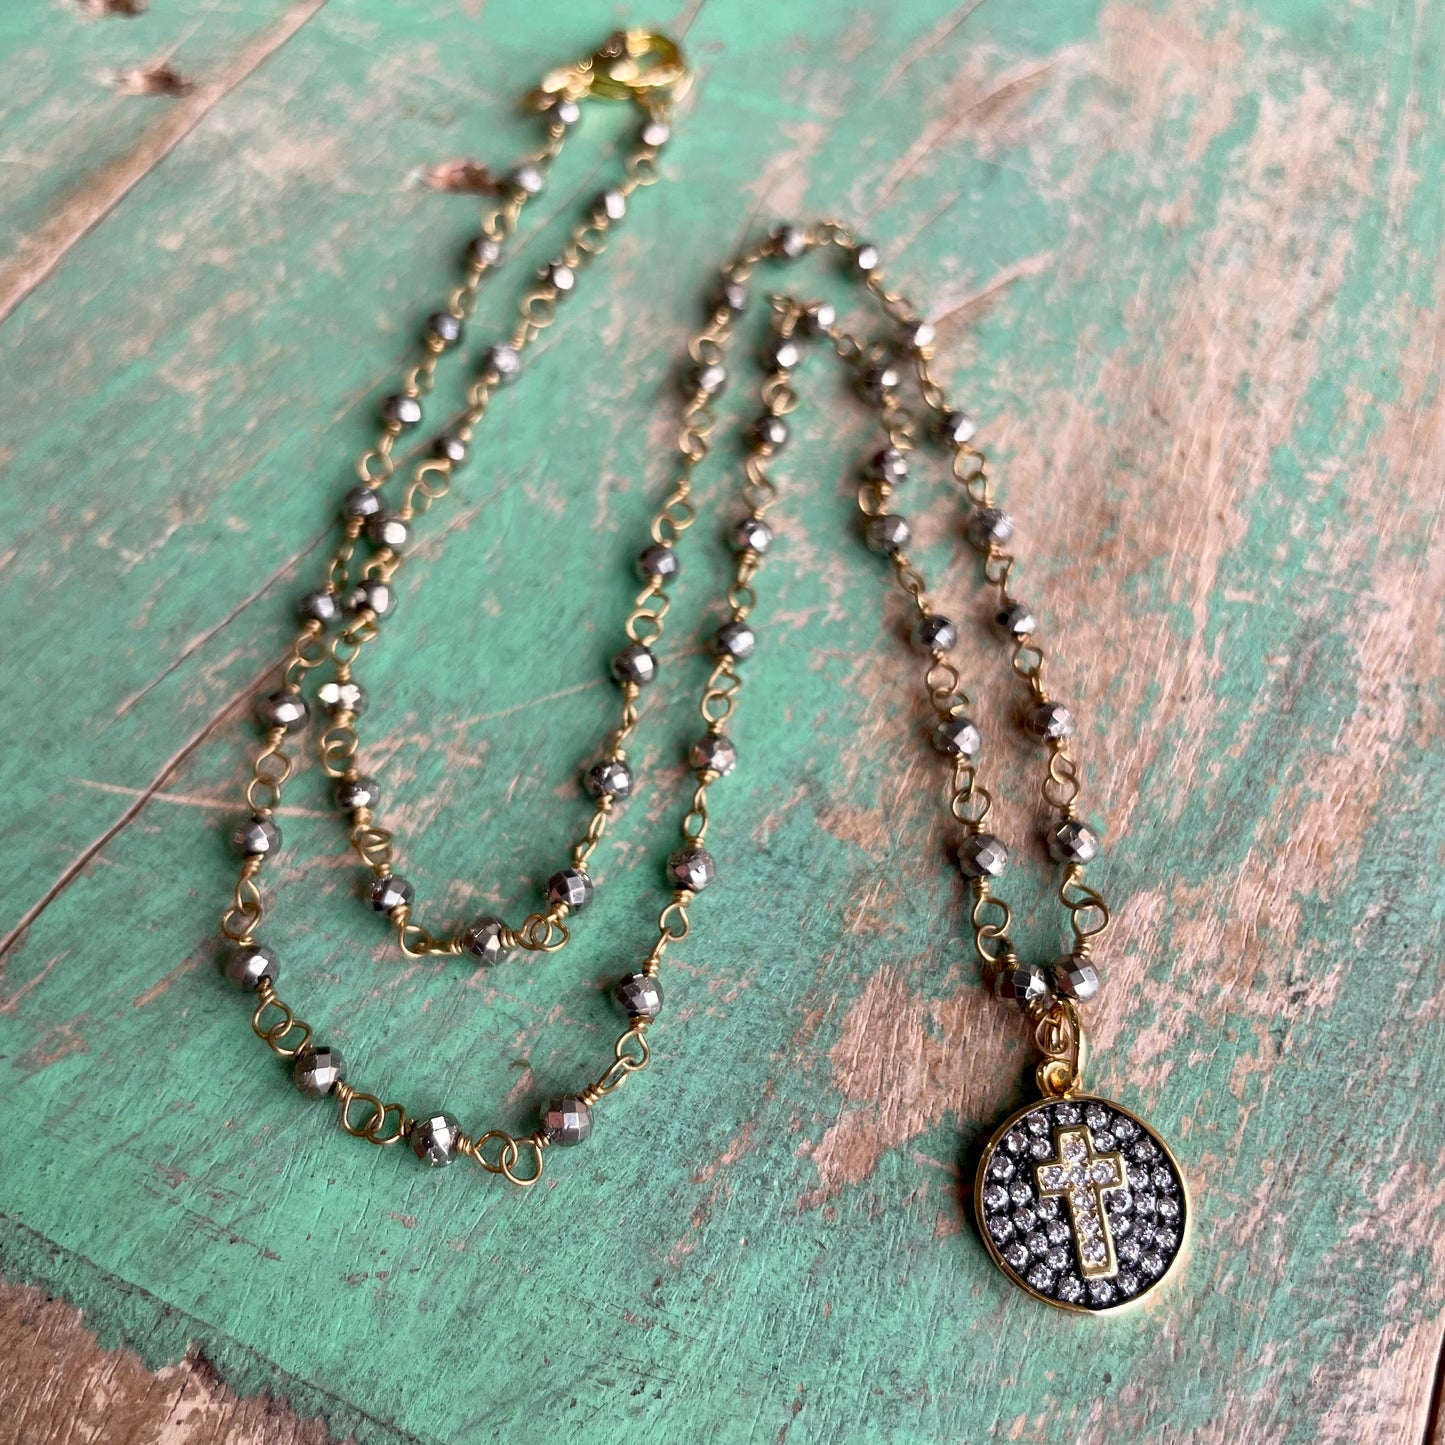 Pave Cross Faith Necklace and Earrings